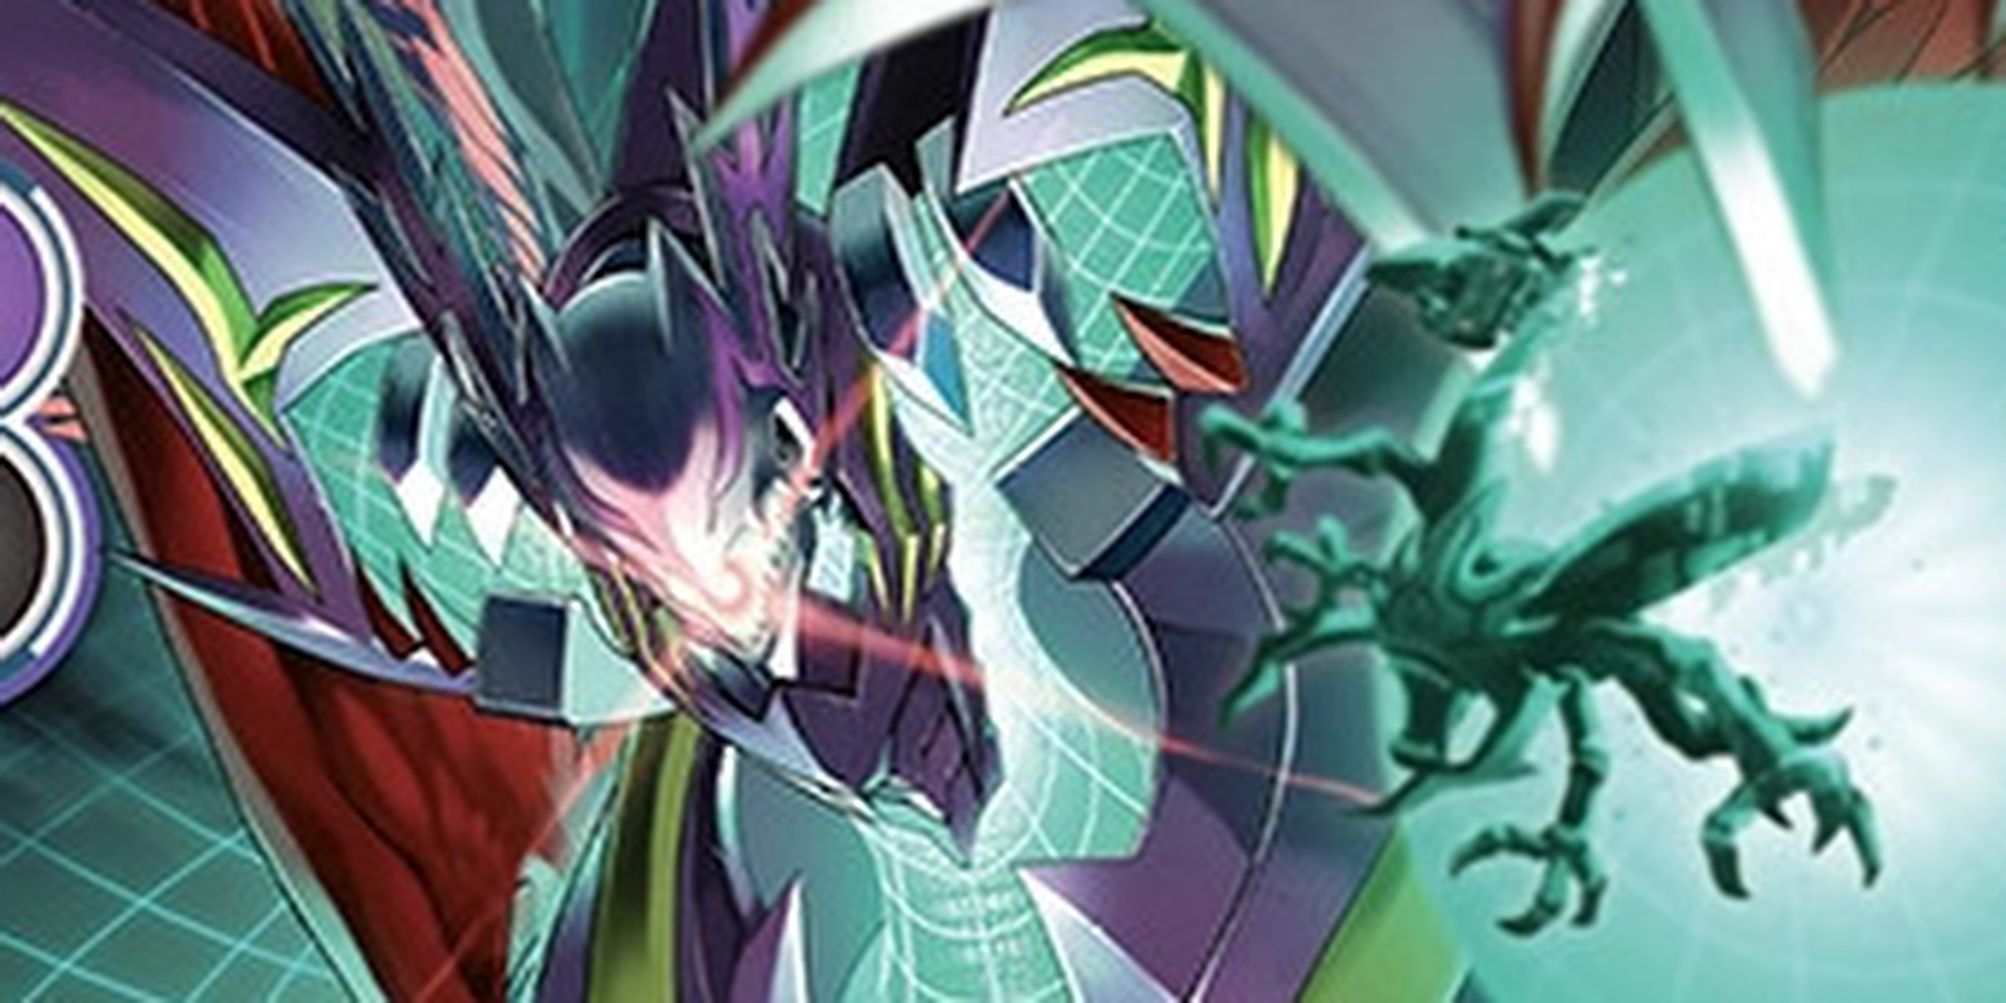 deathxmon cropped art from digimon tcg